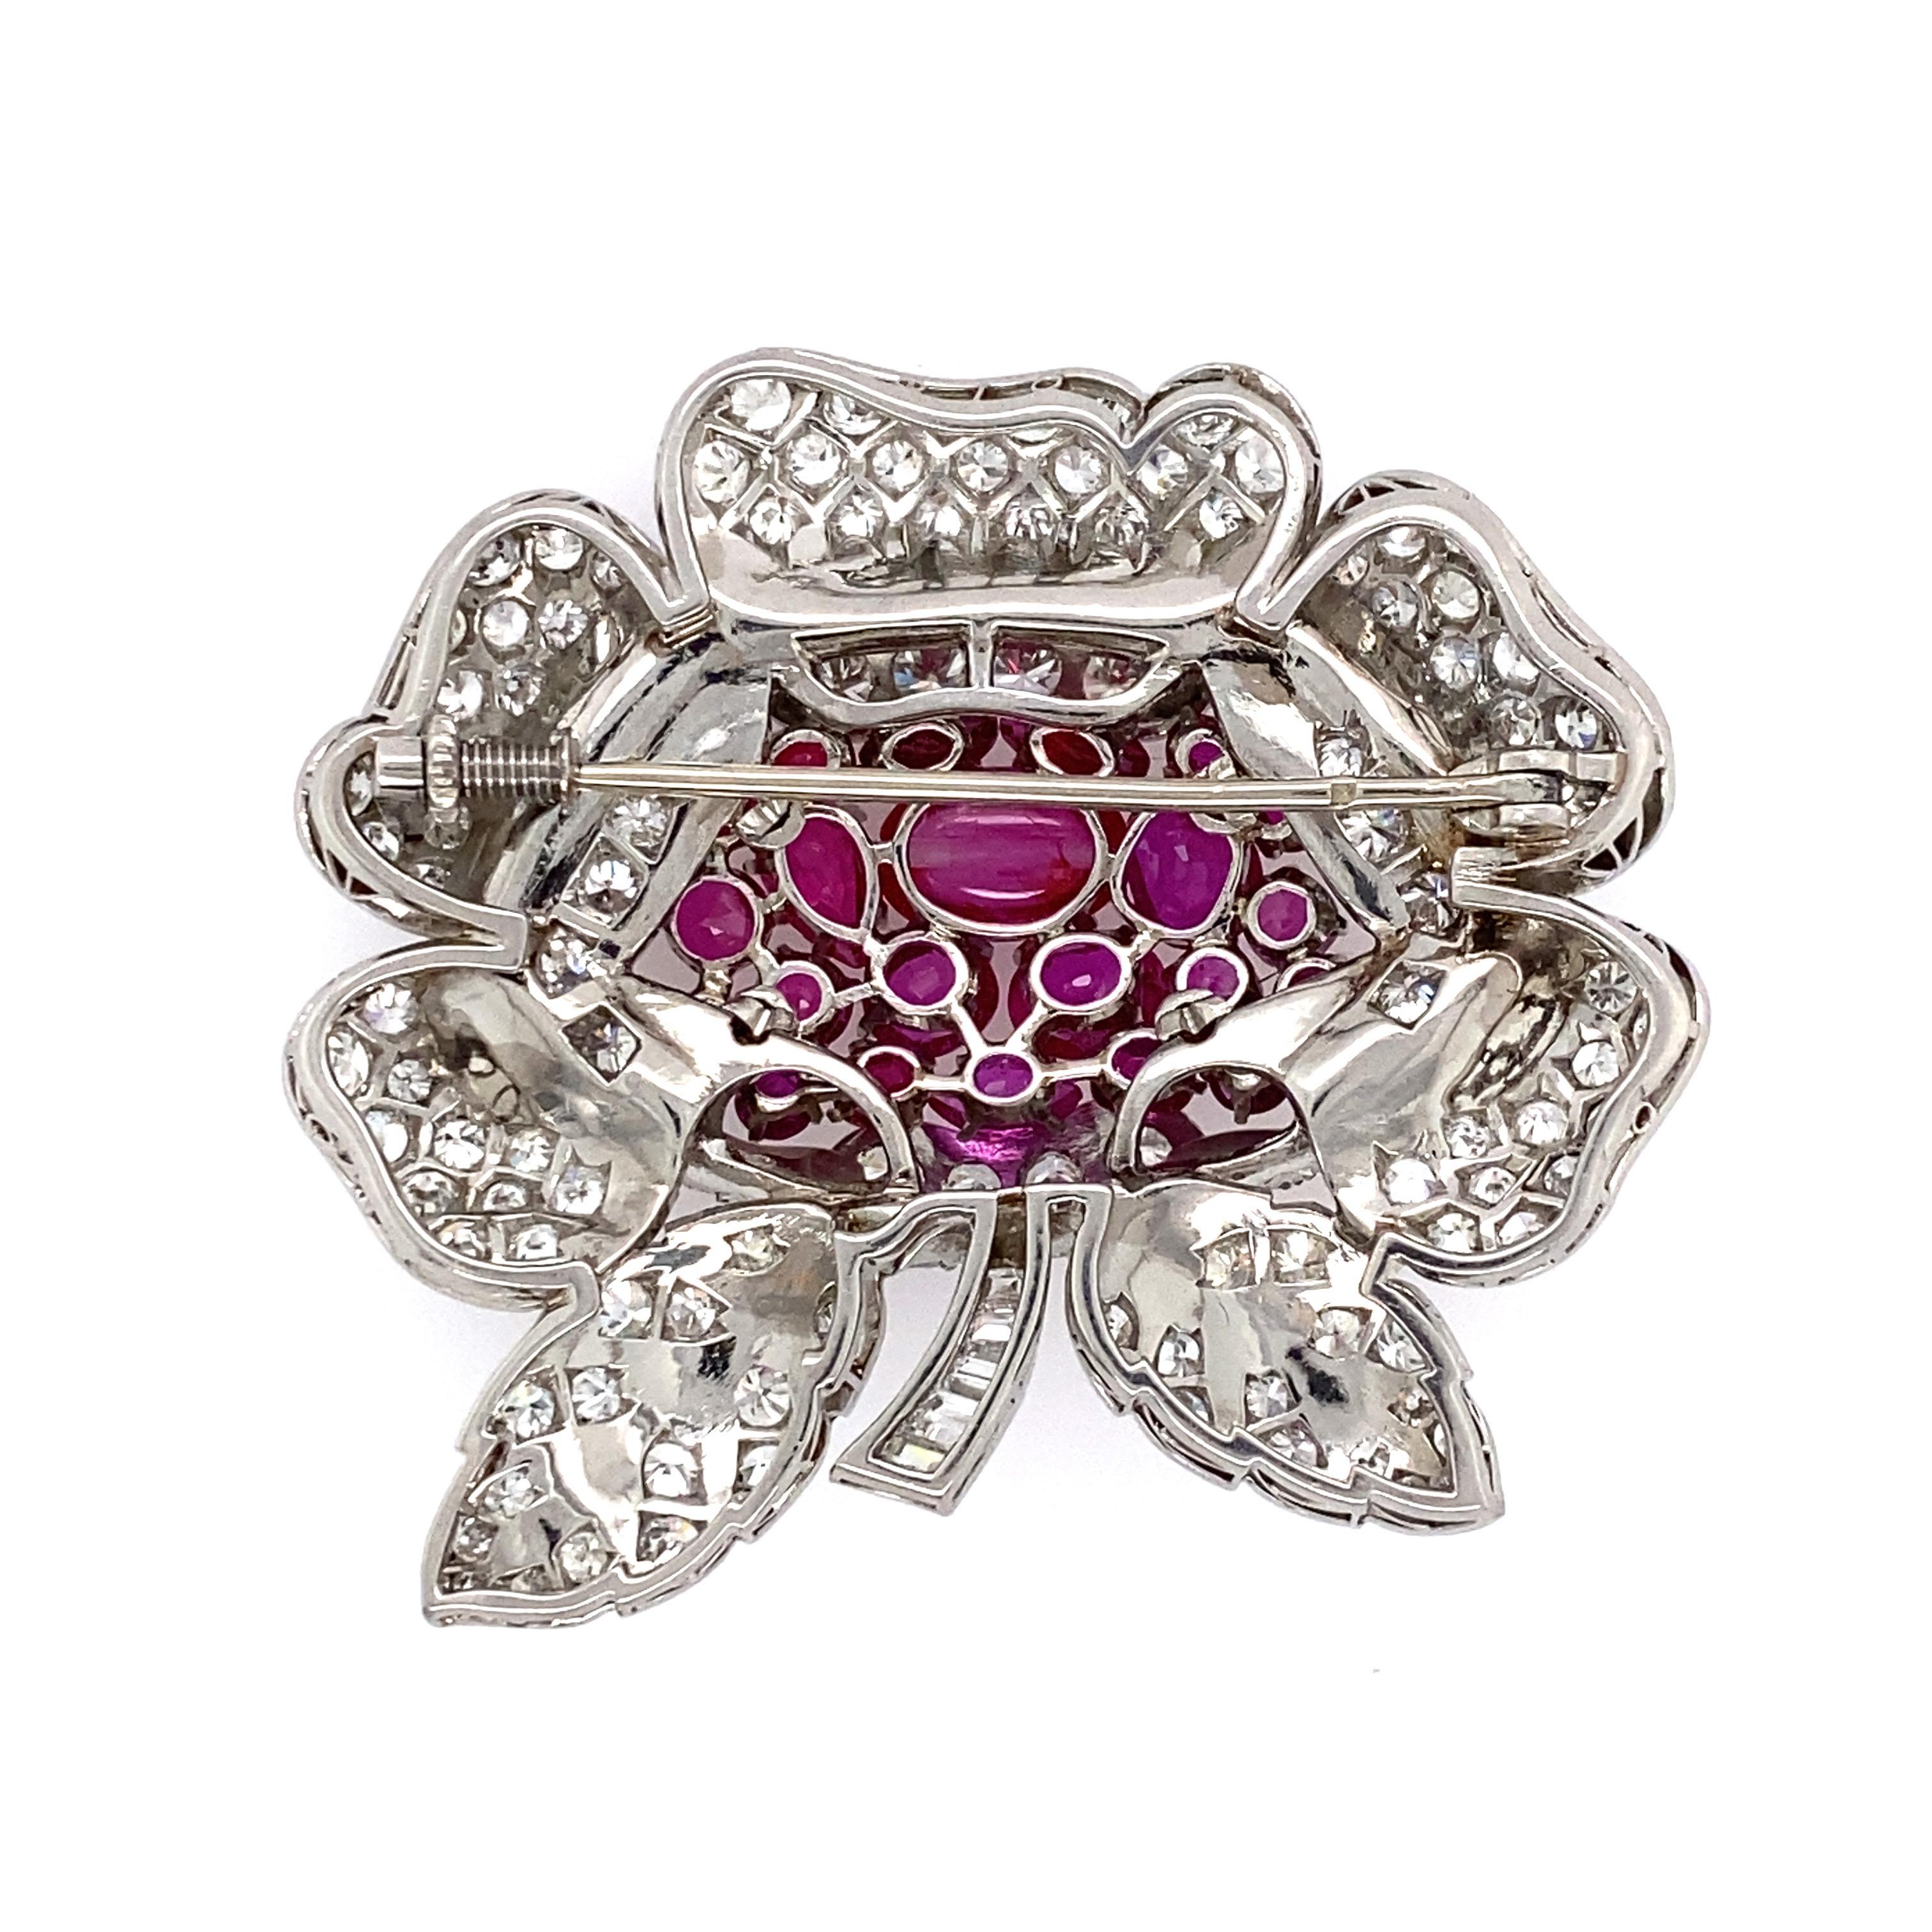 Fabulous French Art Deco platinum Burmese ruby and diamond mounted floral form pin. 22 color match Burmese rubies. Largest cabochon ruby measures approx. 8.5 x5.6mm. Center ruby chipped. Largest oval cut rub measures approx. 5.4 x4.3mm. marquis cut